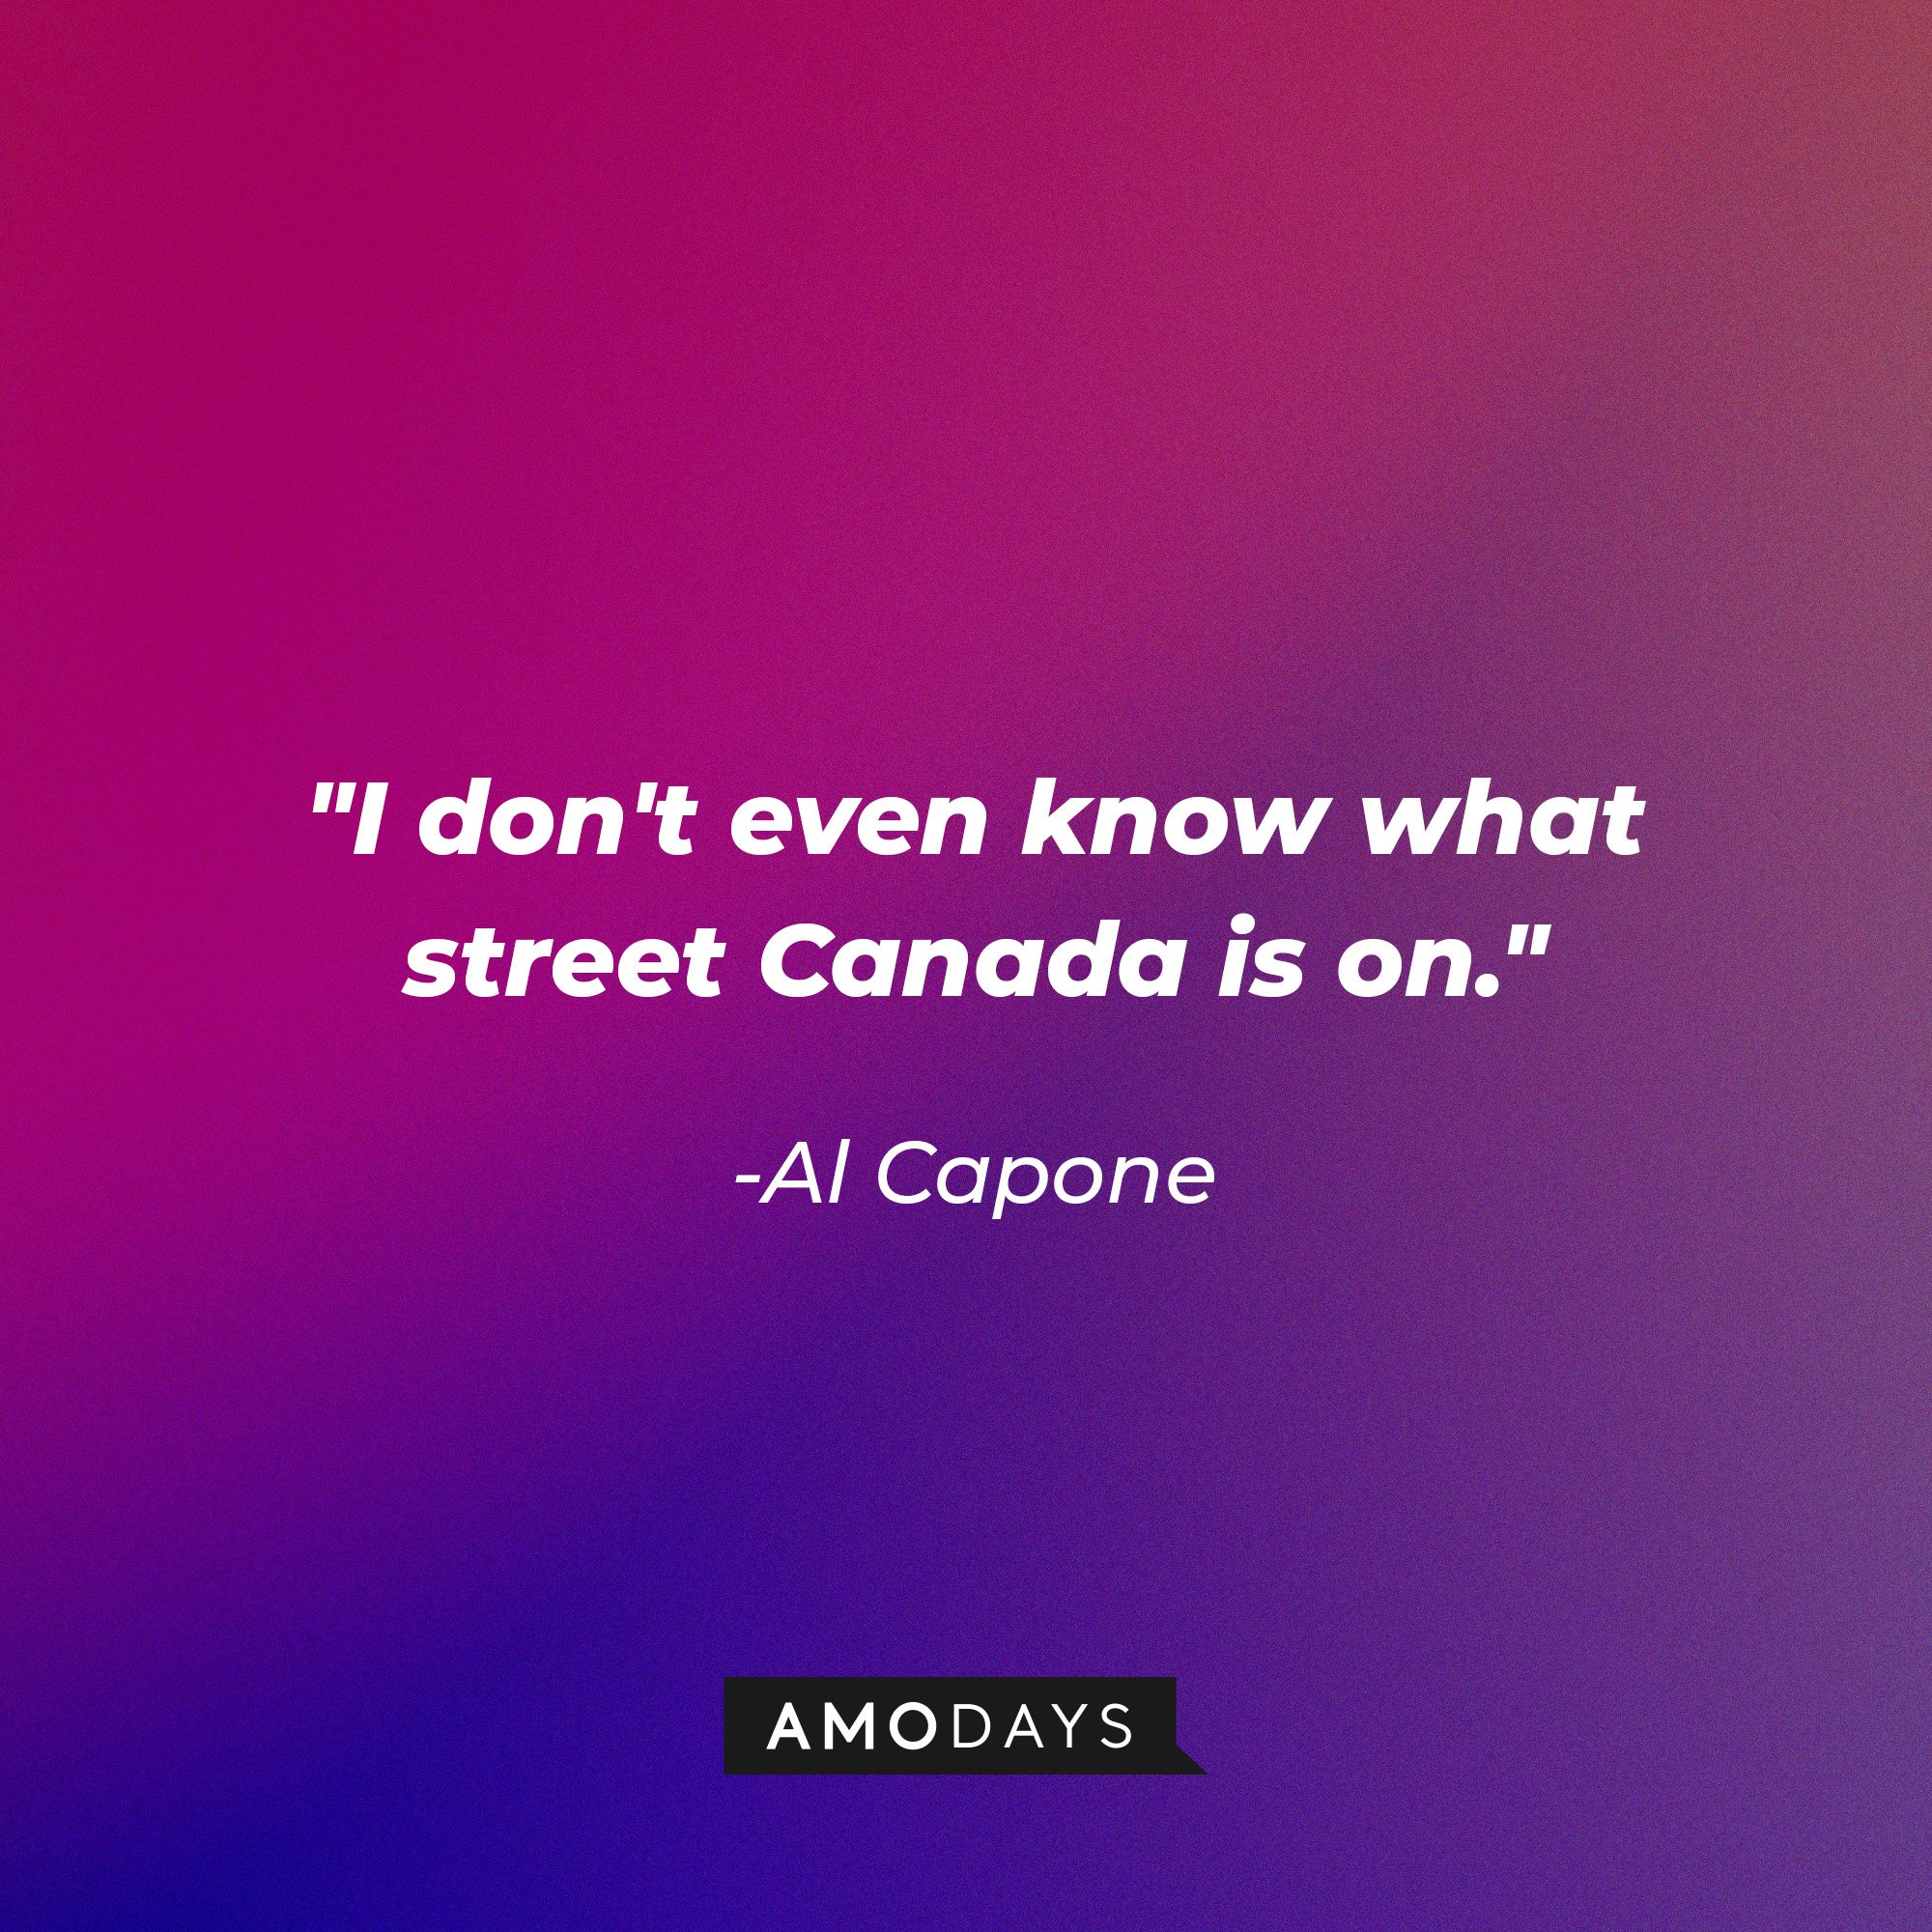 Al Capone’s quote: "I don't even know what street Canada is on." | Image: AmoDays